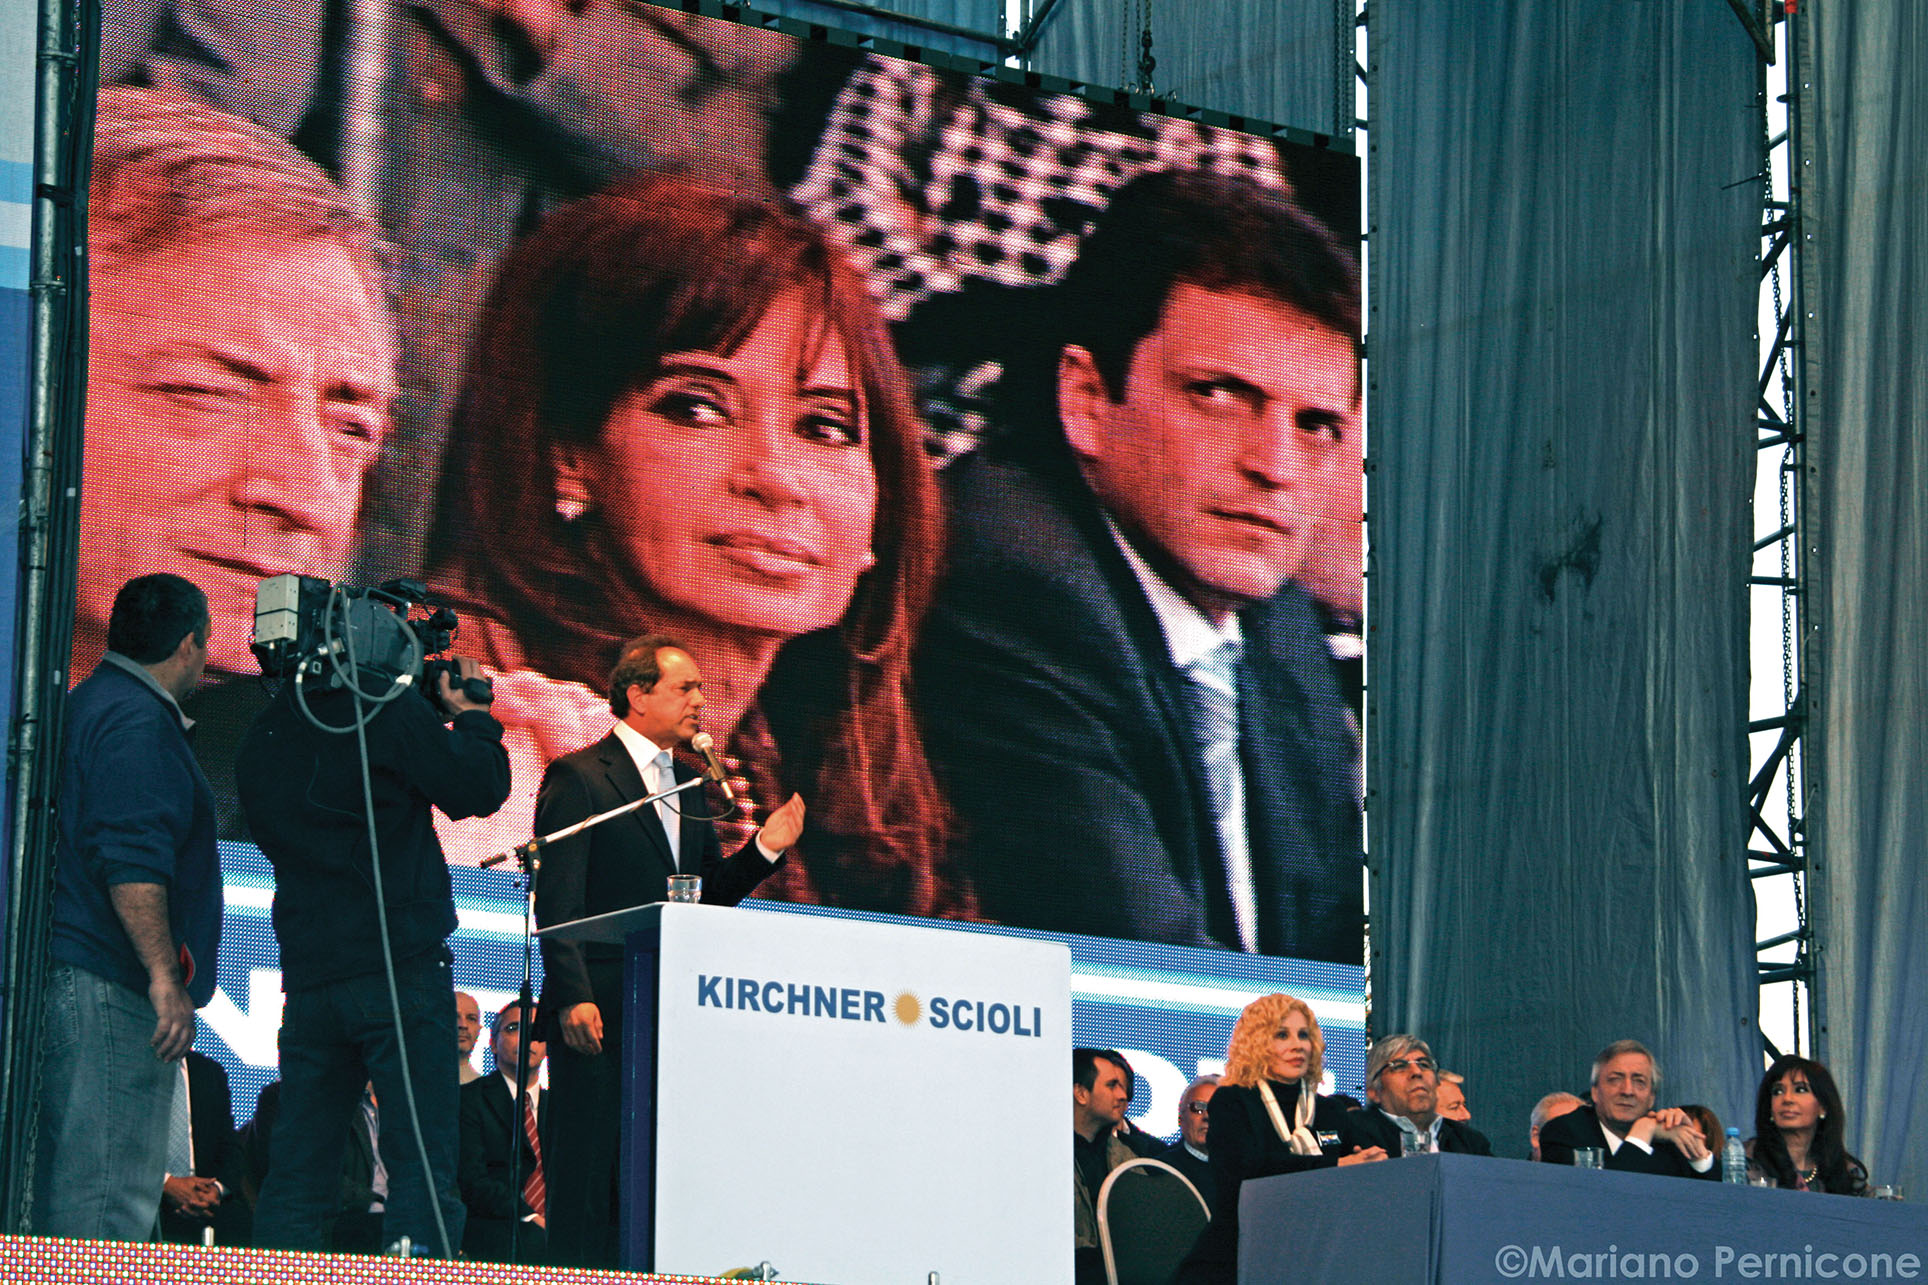 Daniel Scioli stands before a giant screen displaying Néstor Kirchner, Cristina Fernández de Kirchner, and Sergio Massa at a 2009 campaign event. (Photo by Mariano Pernicone.)